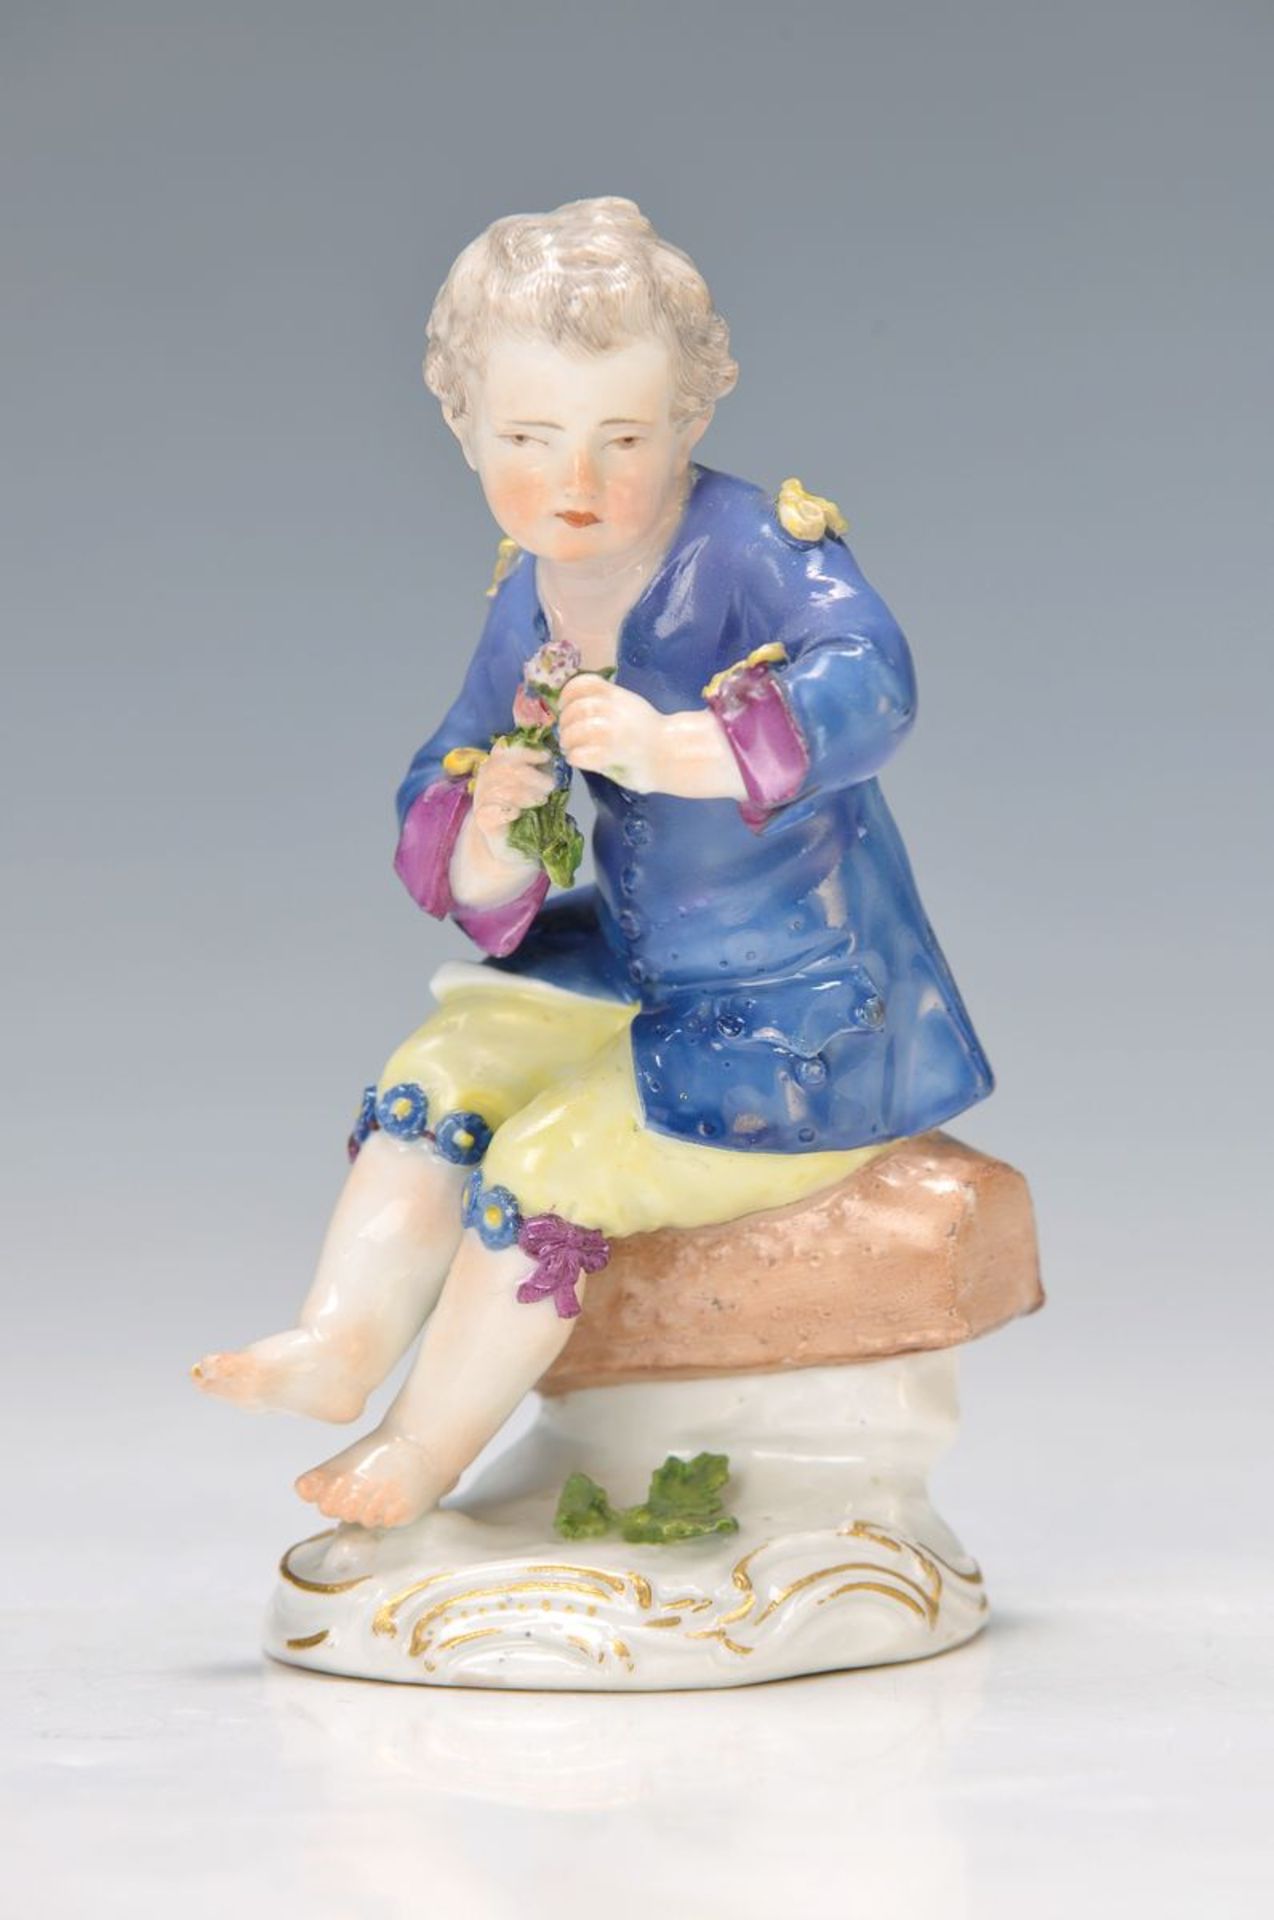 figurine, Meissen, point time, around 1763-73,gardener boy with flowers, colorful painting, rococo